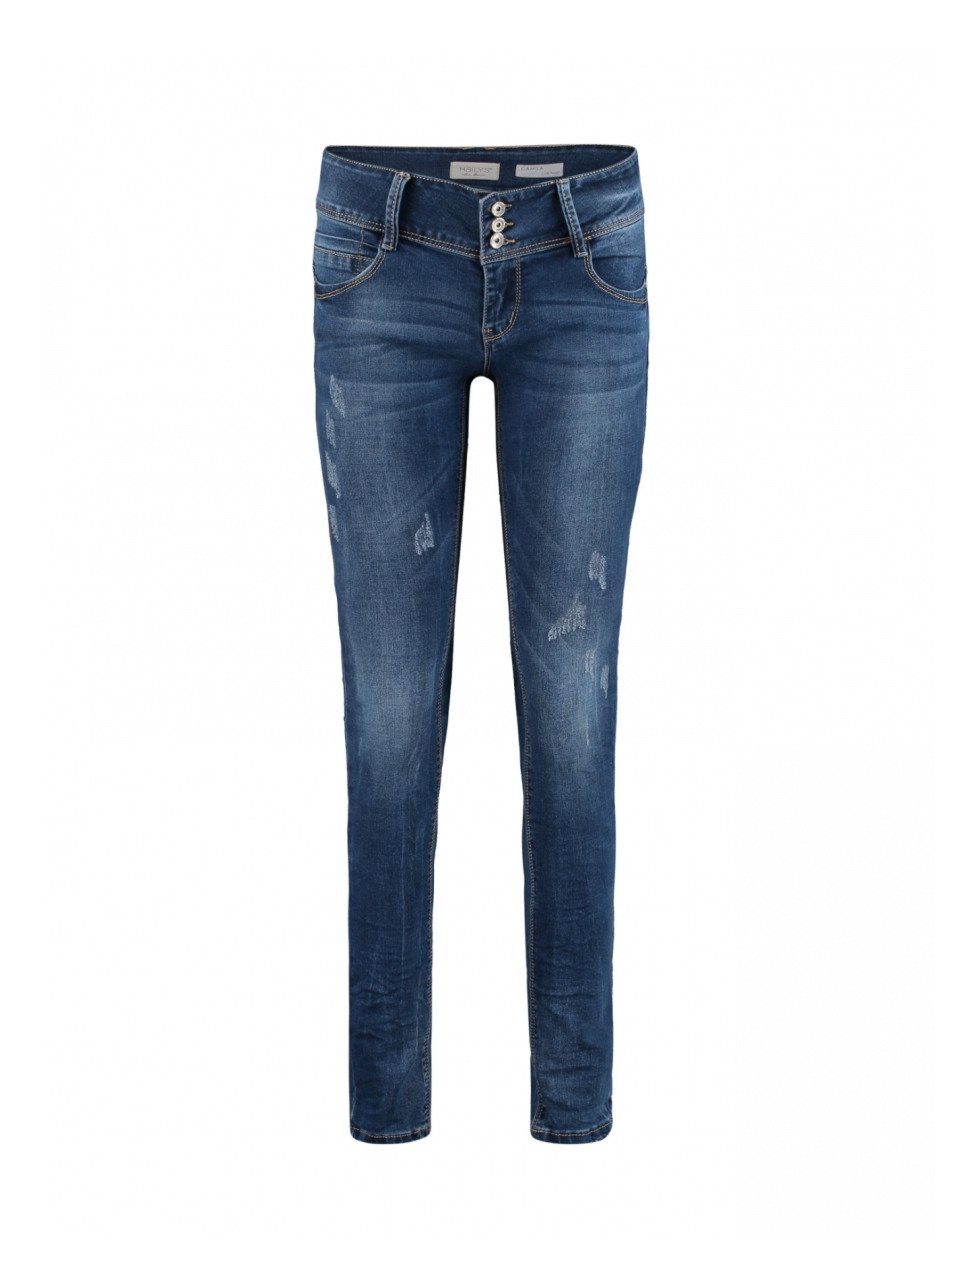 HaILY’S Camila Skinny-fit-Jeans mblue